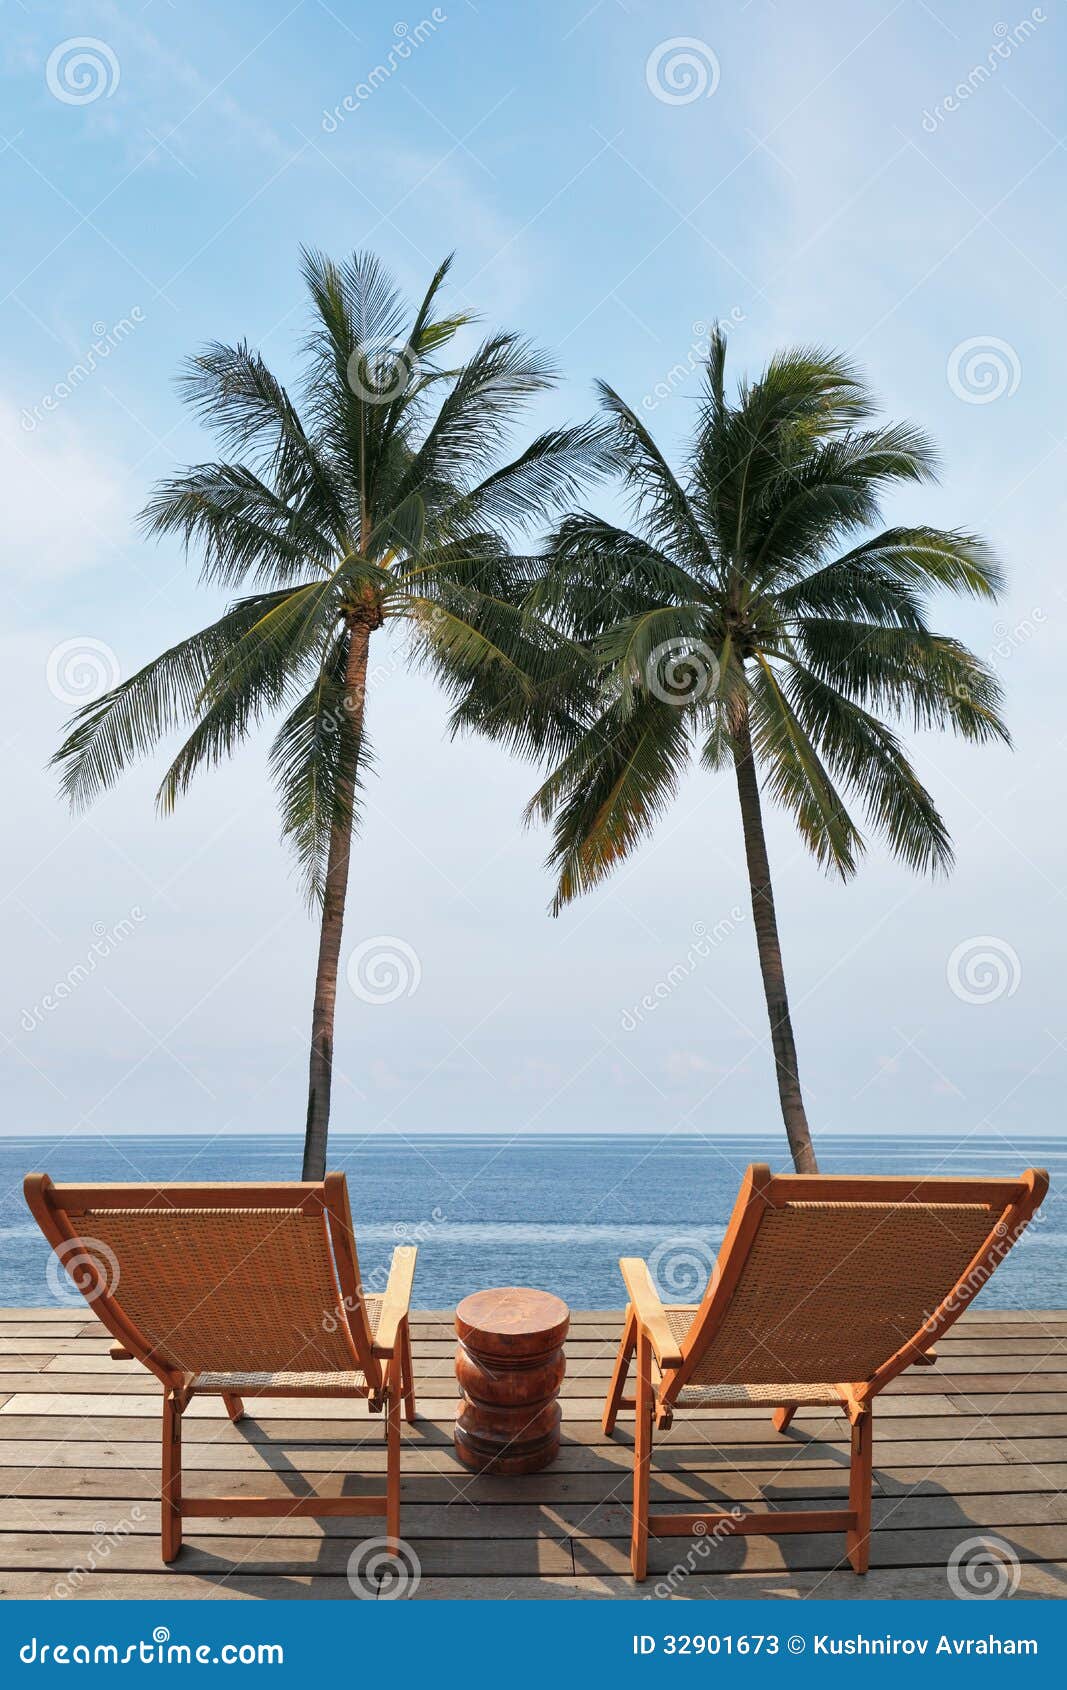 The Luxury Beachfront Pool And The Ocean Stock Image 